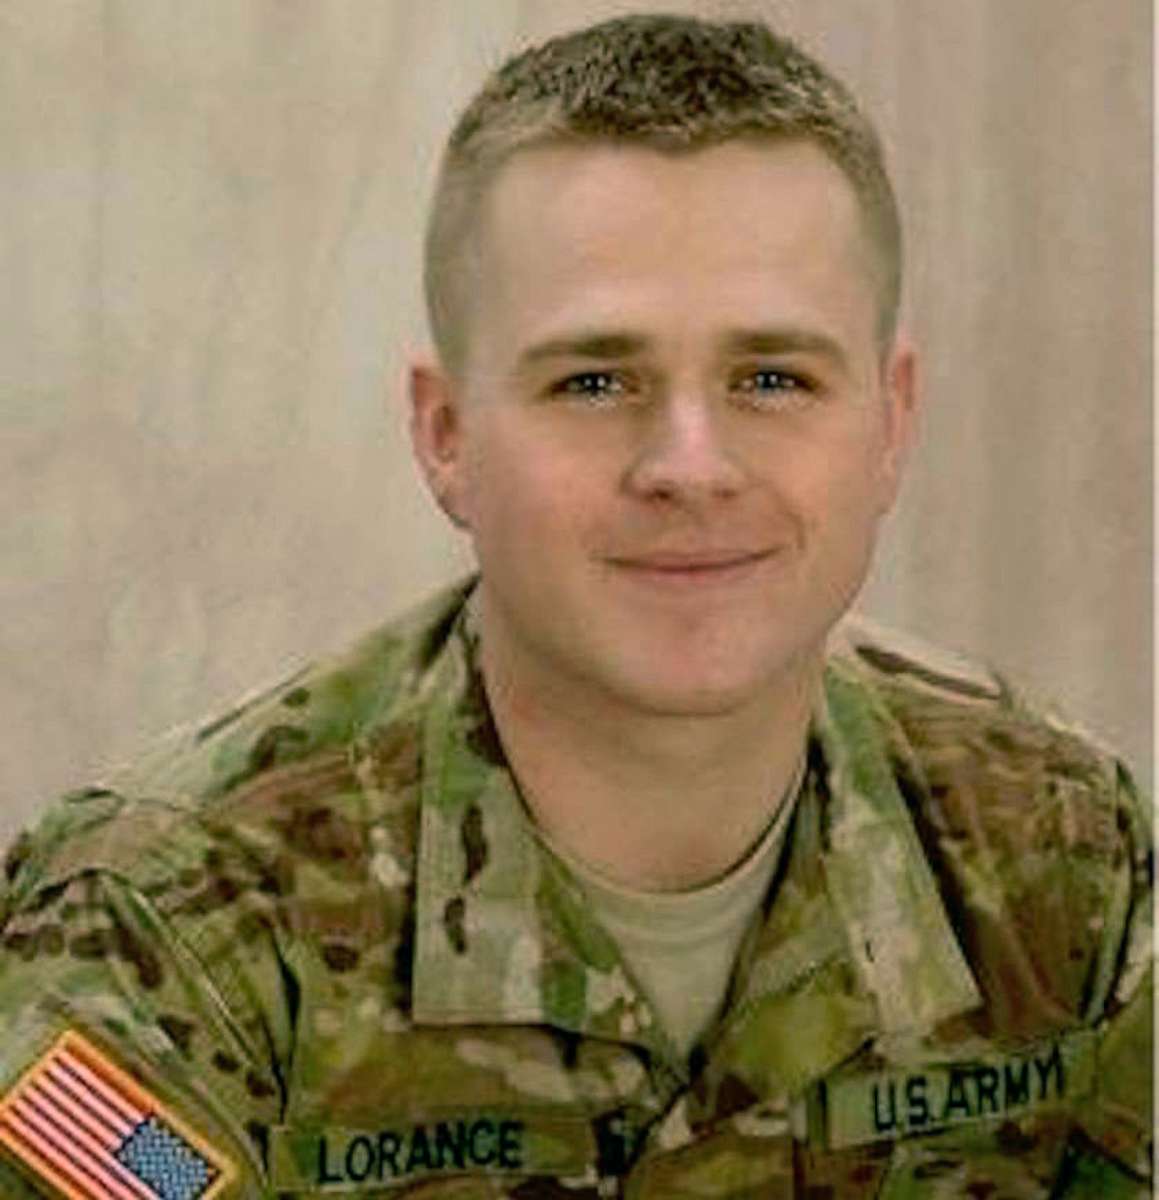 PHOTO: Army 1st Lt. Clint Lorance is pictured in an undated handout photo.